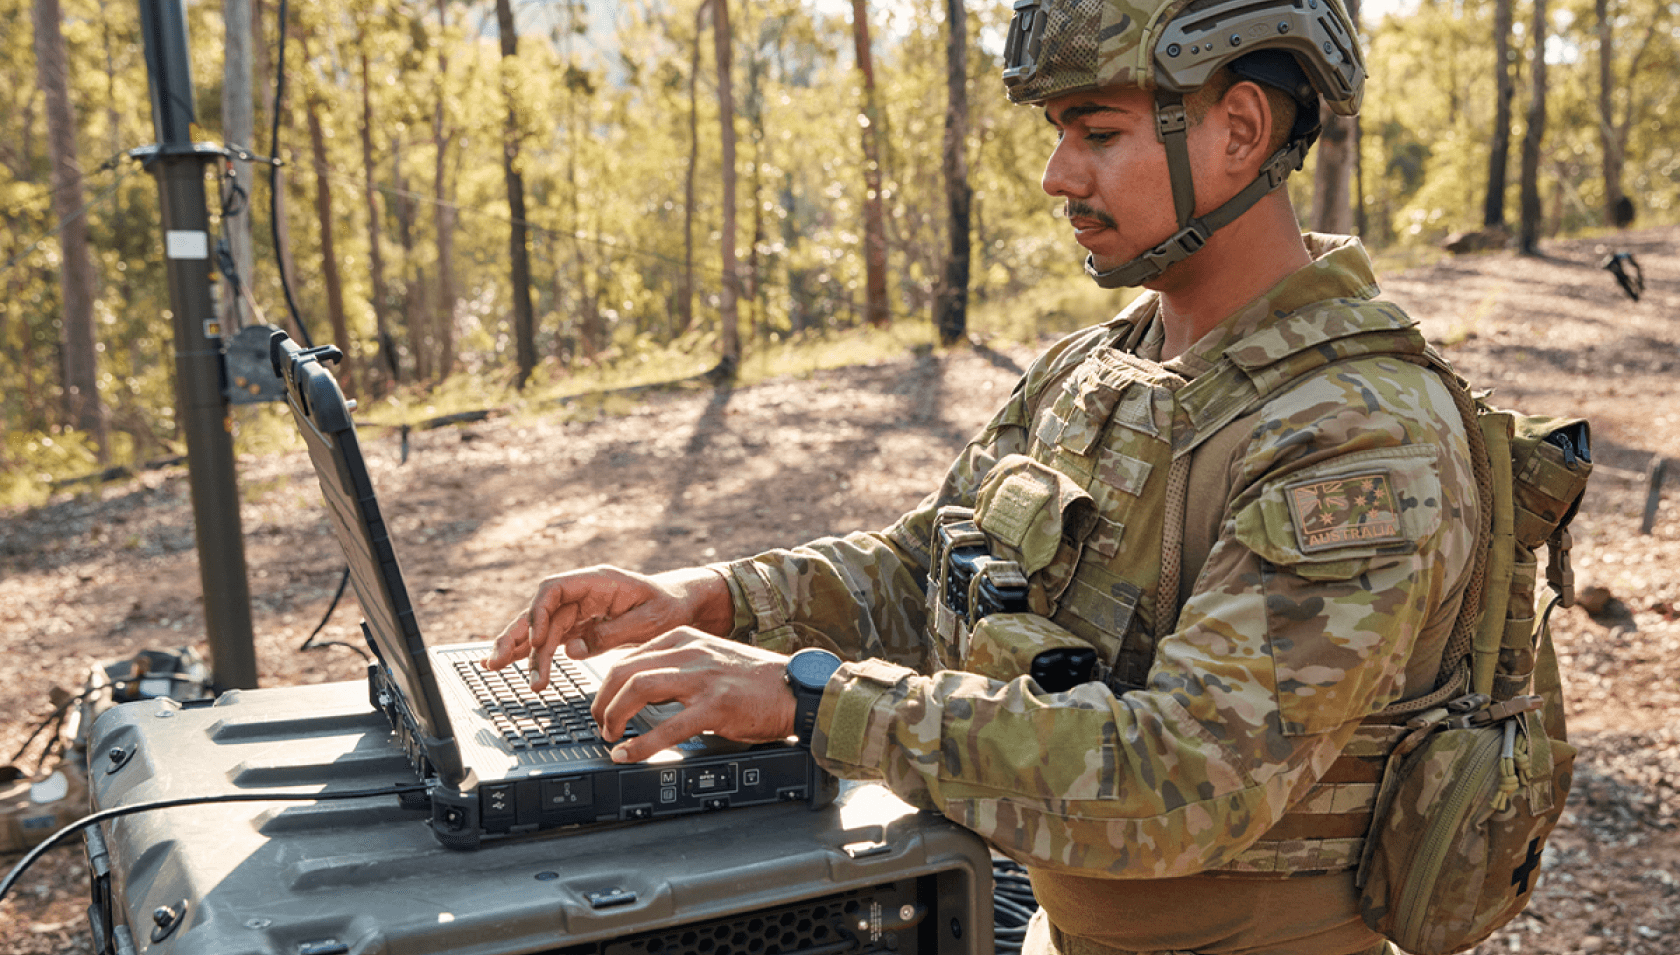 Out in the field, a member of the Army works on his laptop.